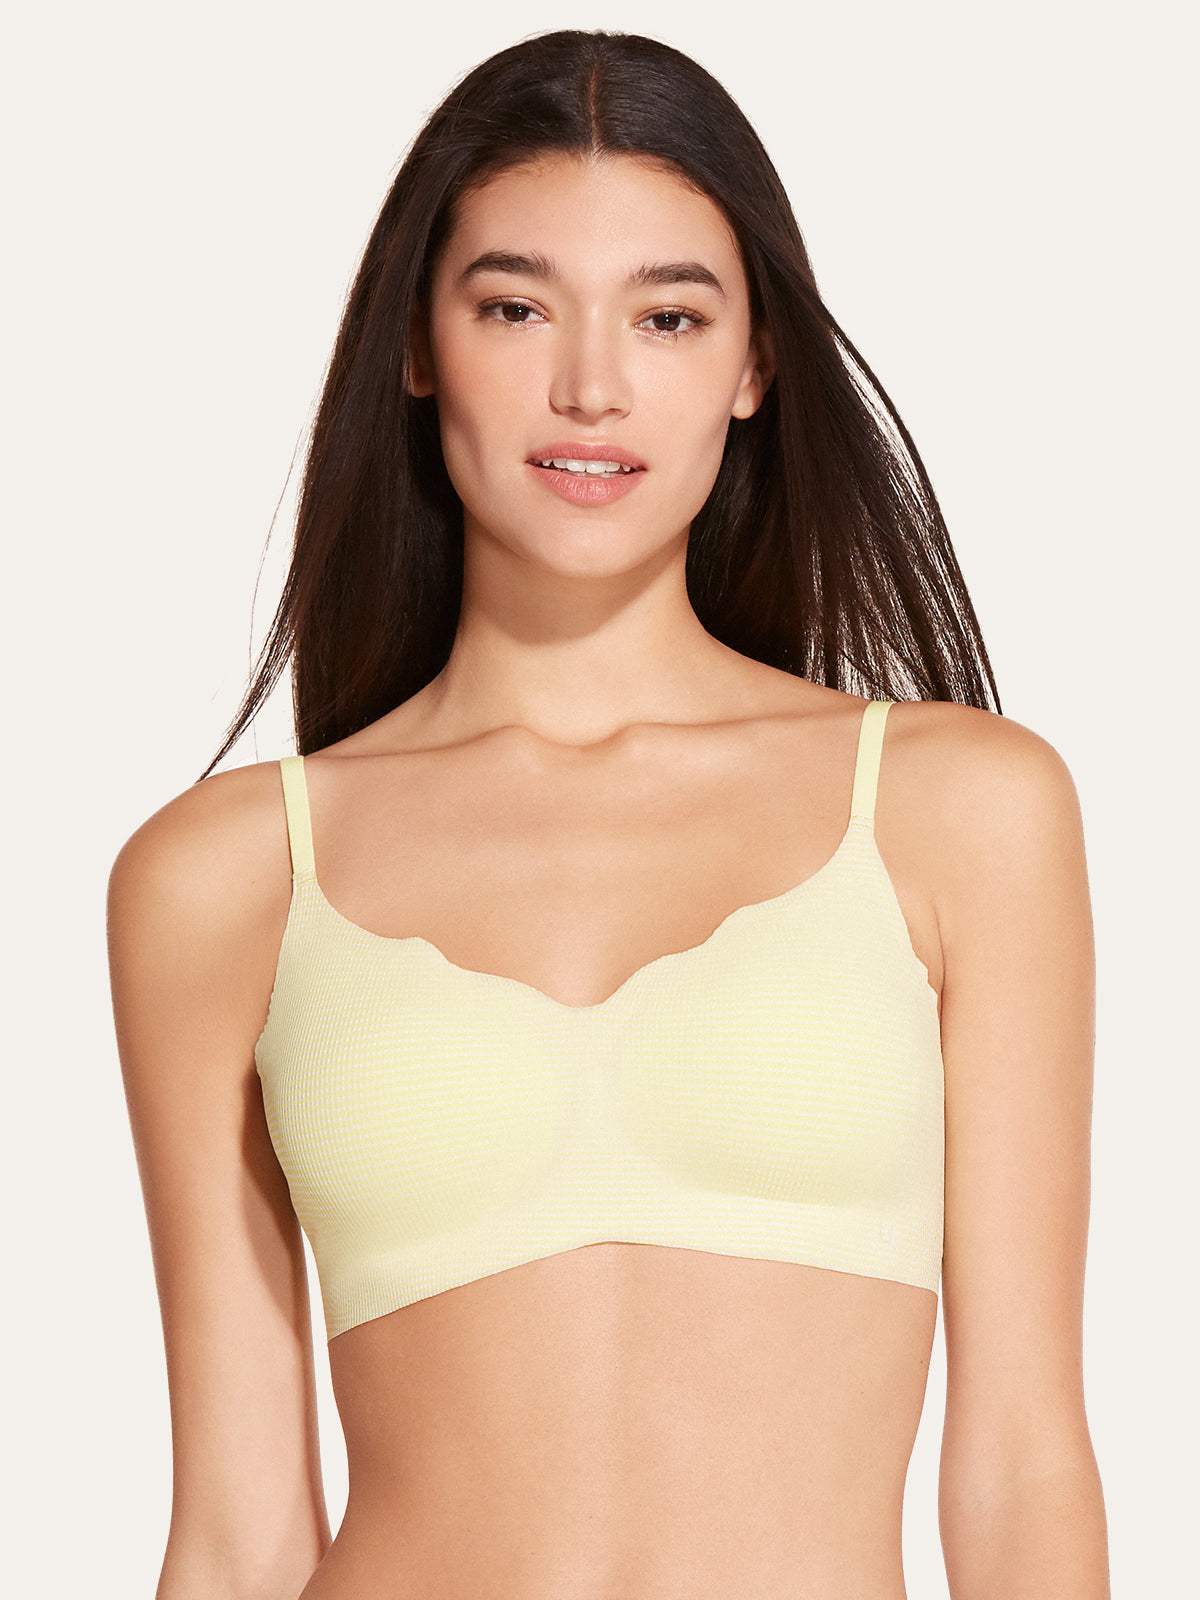 Breeze In Support Ribbed Wavy Collar Cooling Bra